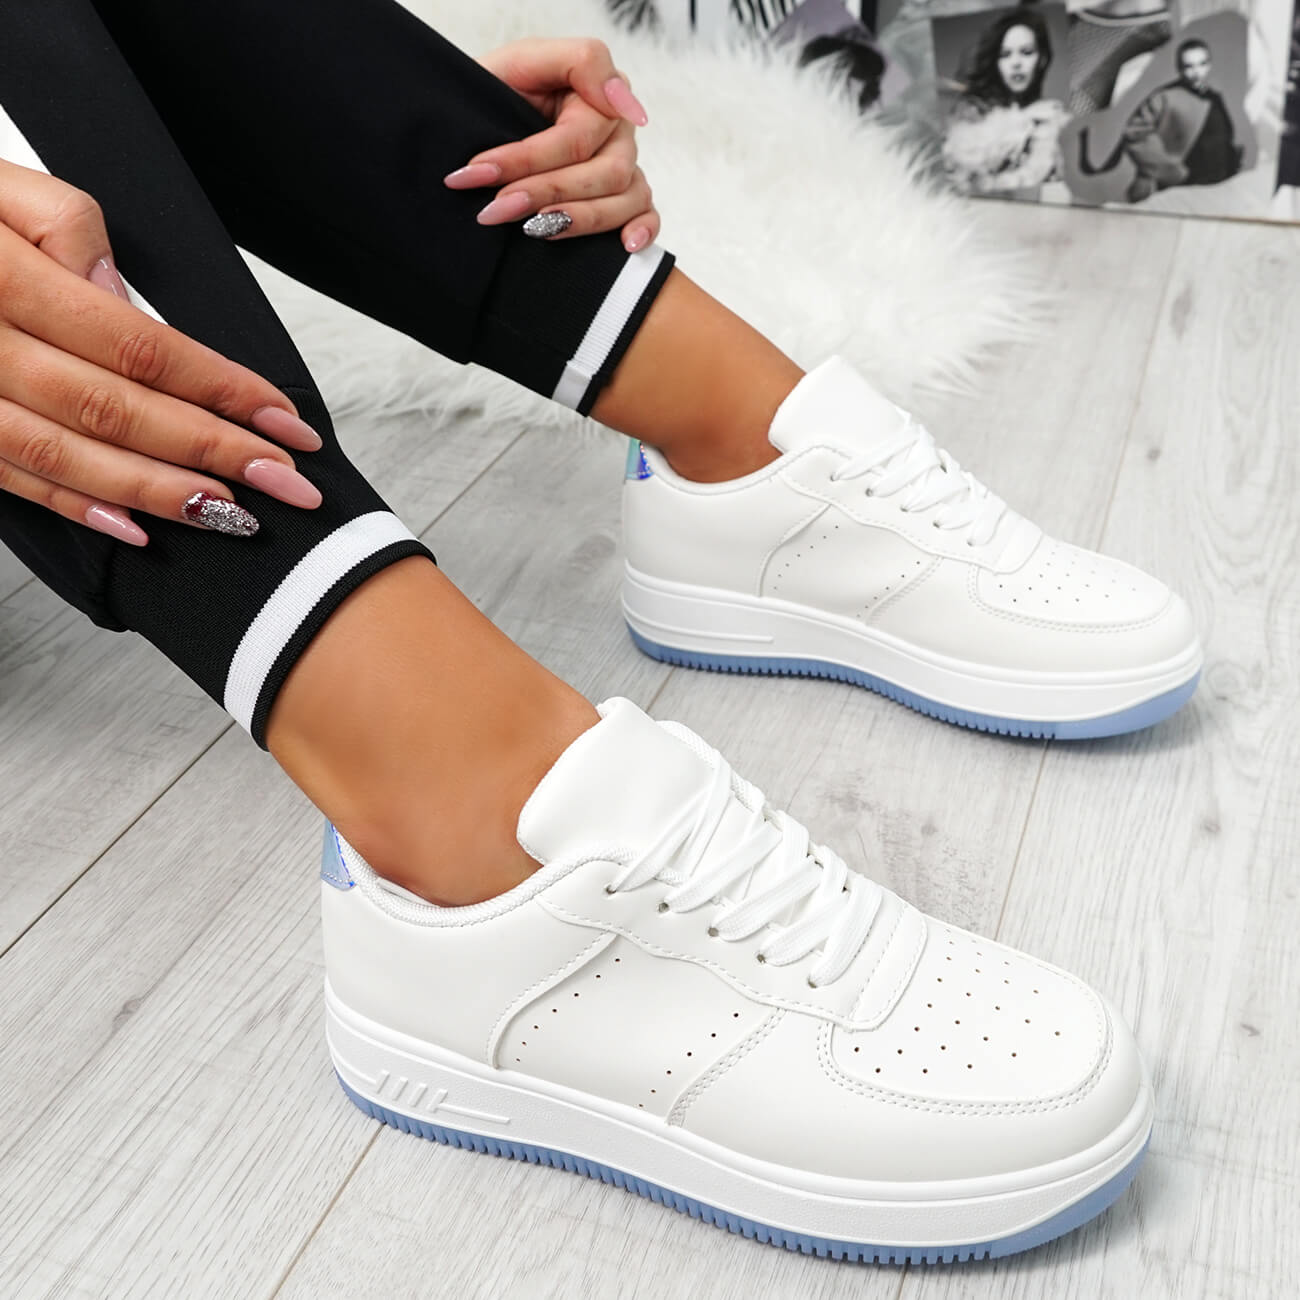 comfy womens sneakers